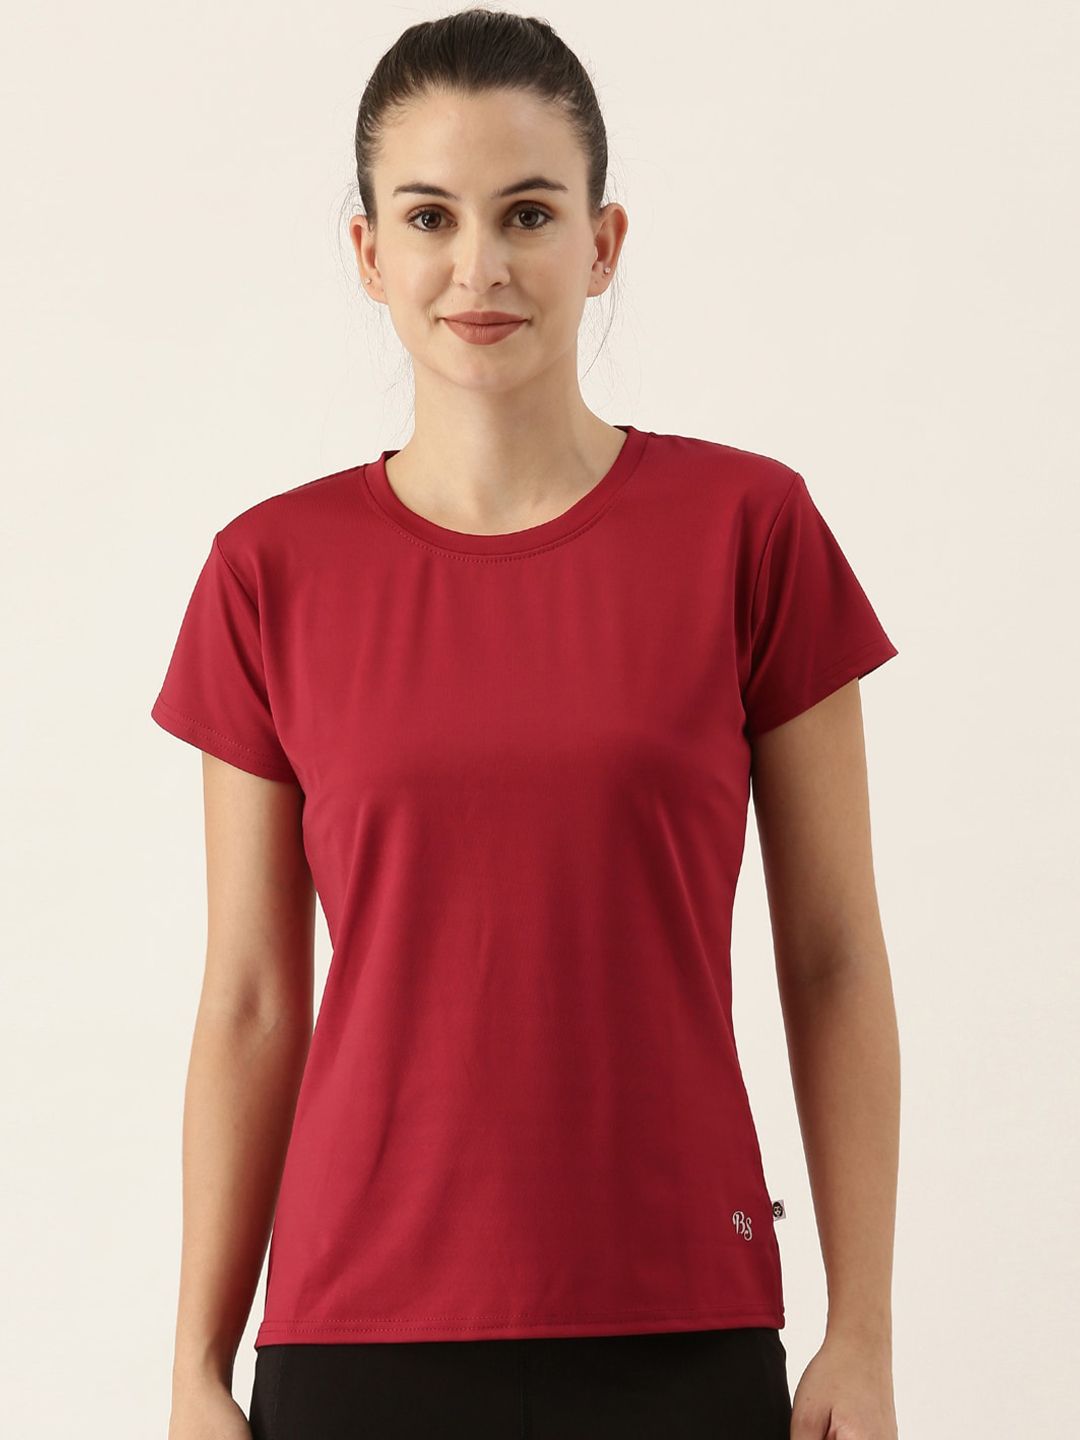 Bannos Swagger Women Maroon Solid Running T-shirt Price in India